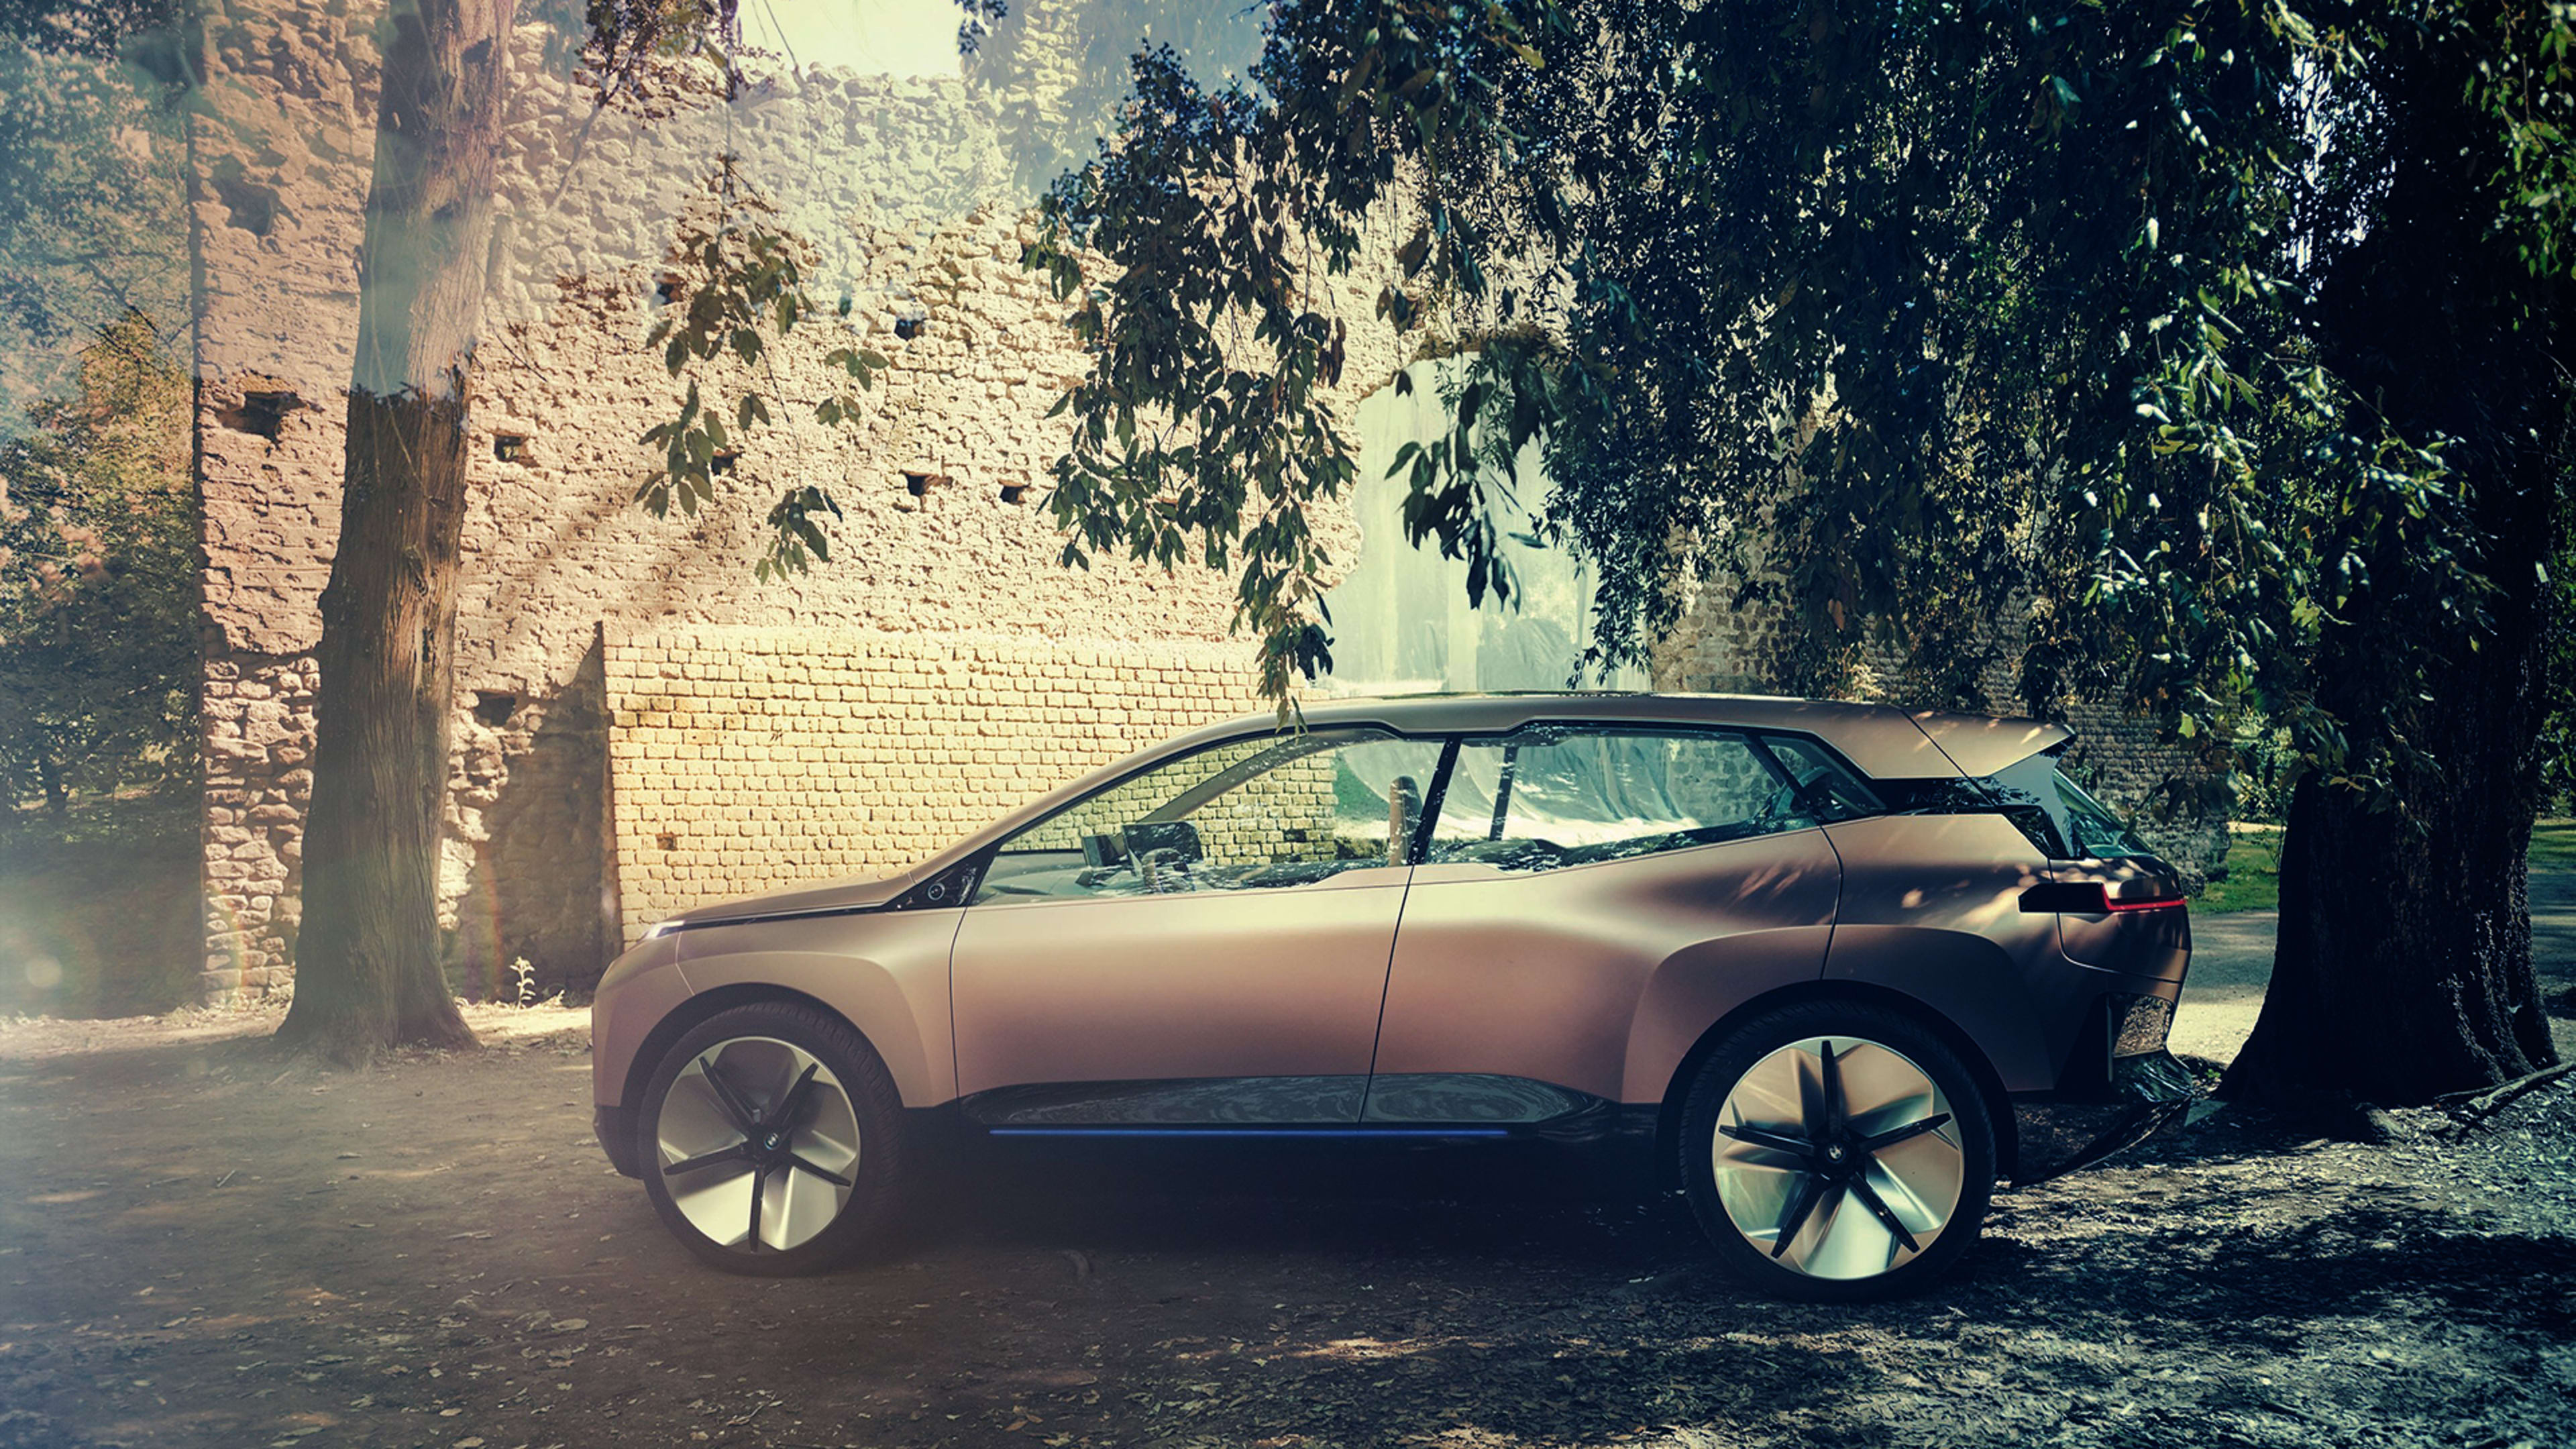 BMW’s Vision iNext concept car is the ultimate self-driving machine